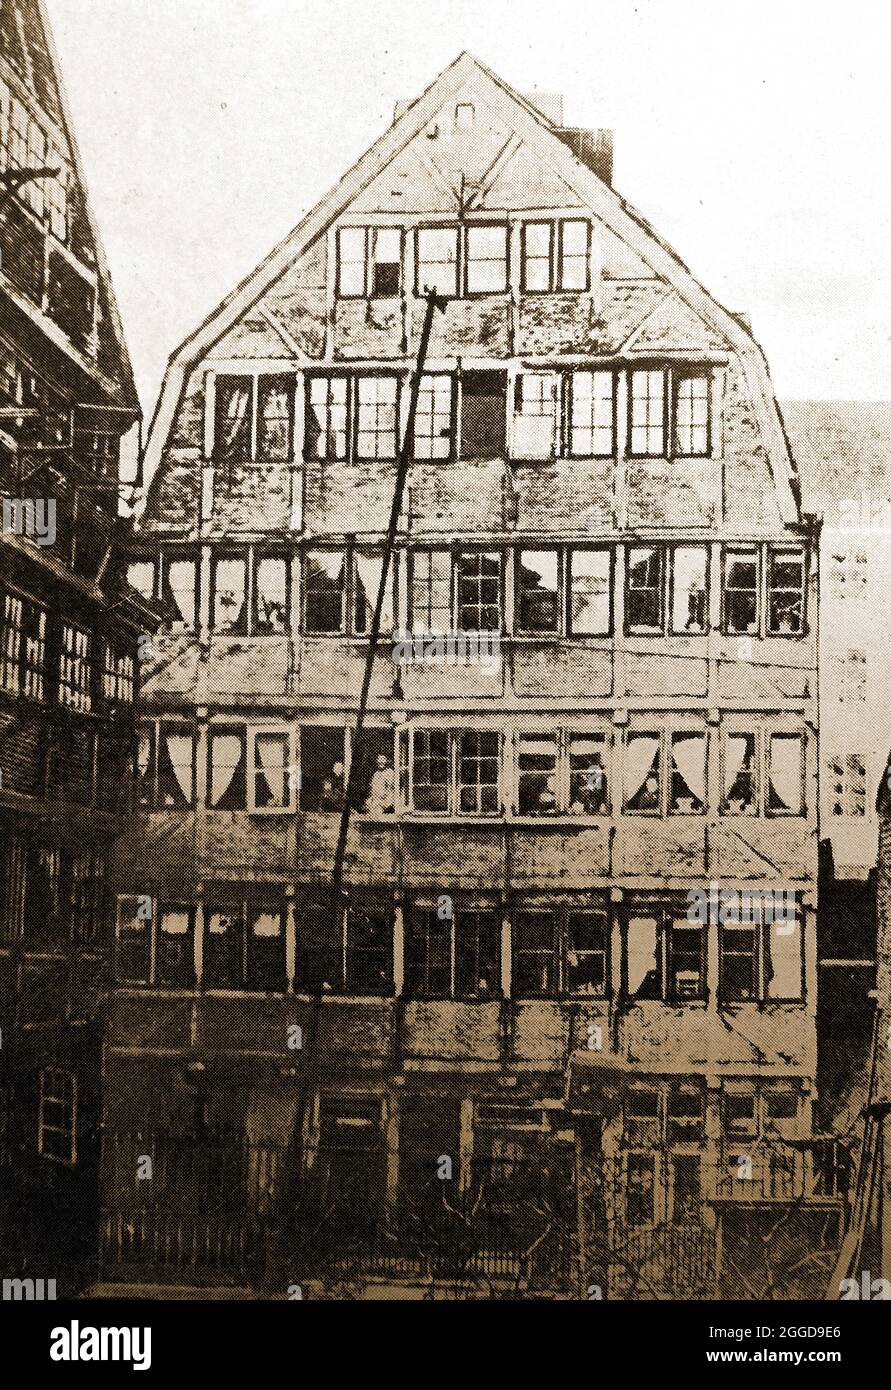 A 1939 printed photograph of the birthplace  (1833) of composer Johannes Brahms (1833-1897) in Hamburg, Germany. It was destroyed in WWII by bombing in 1943. Brahms was a Lutheran German composer, pianist, and conductor. He was a virtuoso pianist who composed  symphonies , chamber music and pieces for piano, organ, voice, and chorus singers. Stock Photo